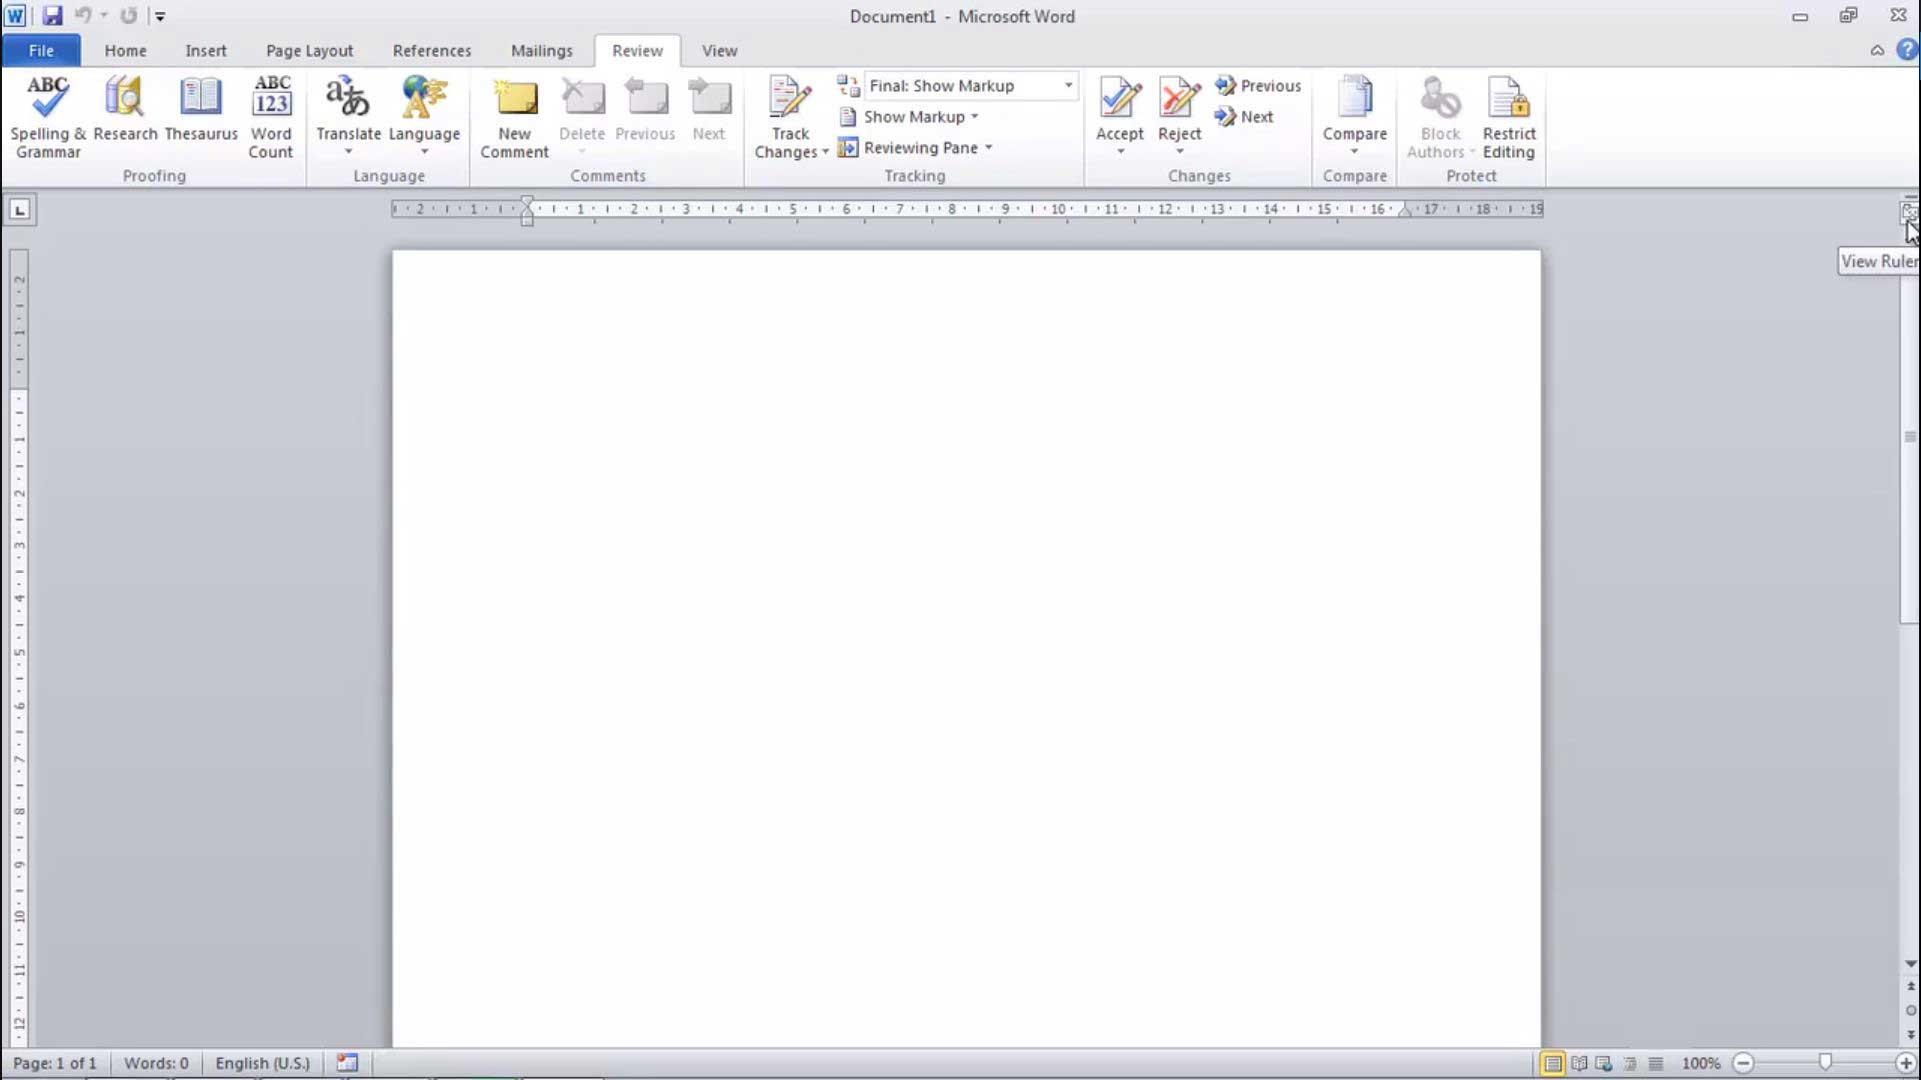 download microsoft word excel 2010 free